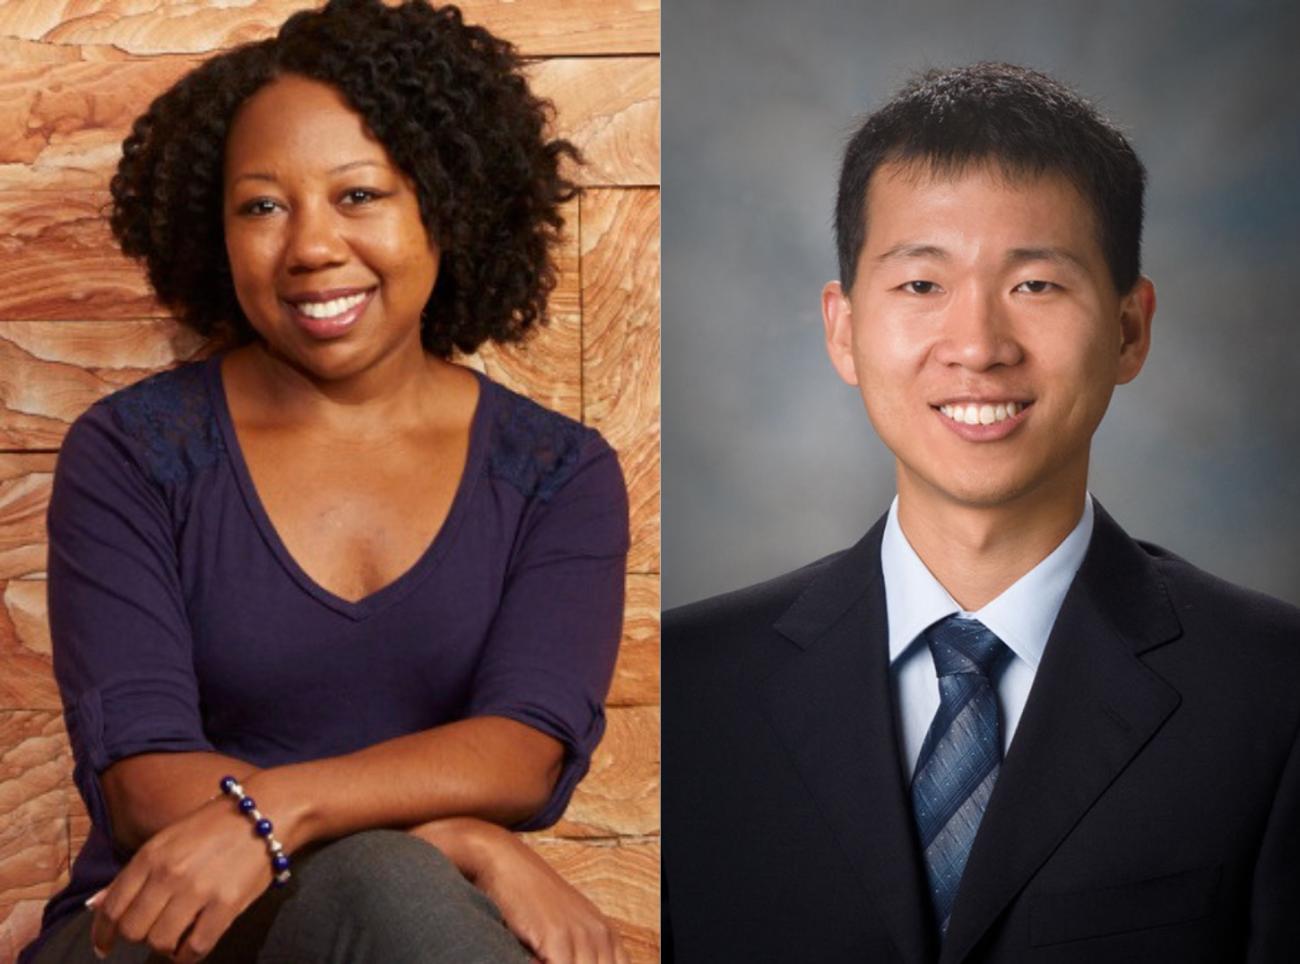 Two headshot photos of professors. Karmella Haynes is the left photo and Peng Qiu is the right photo.